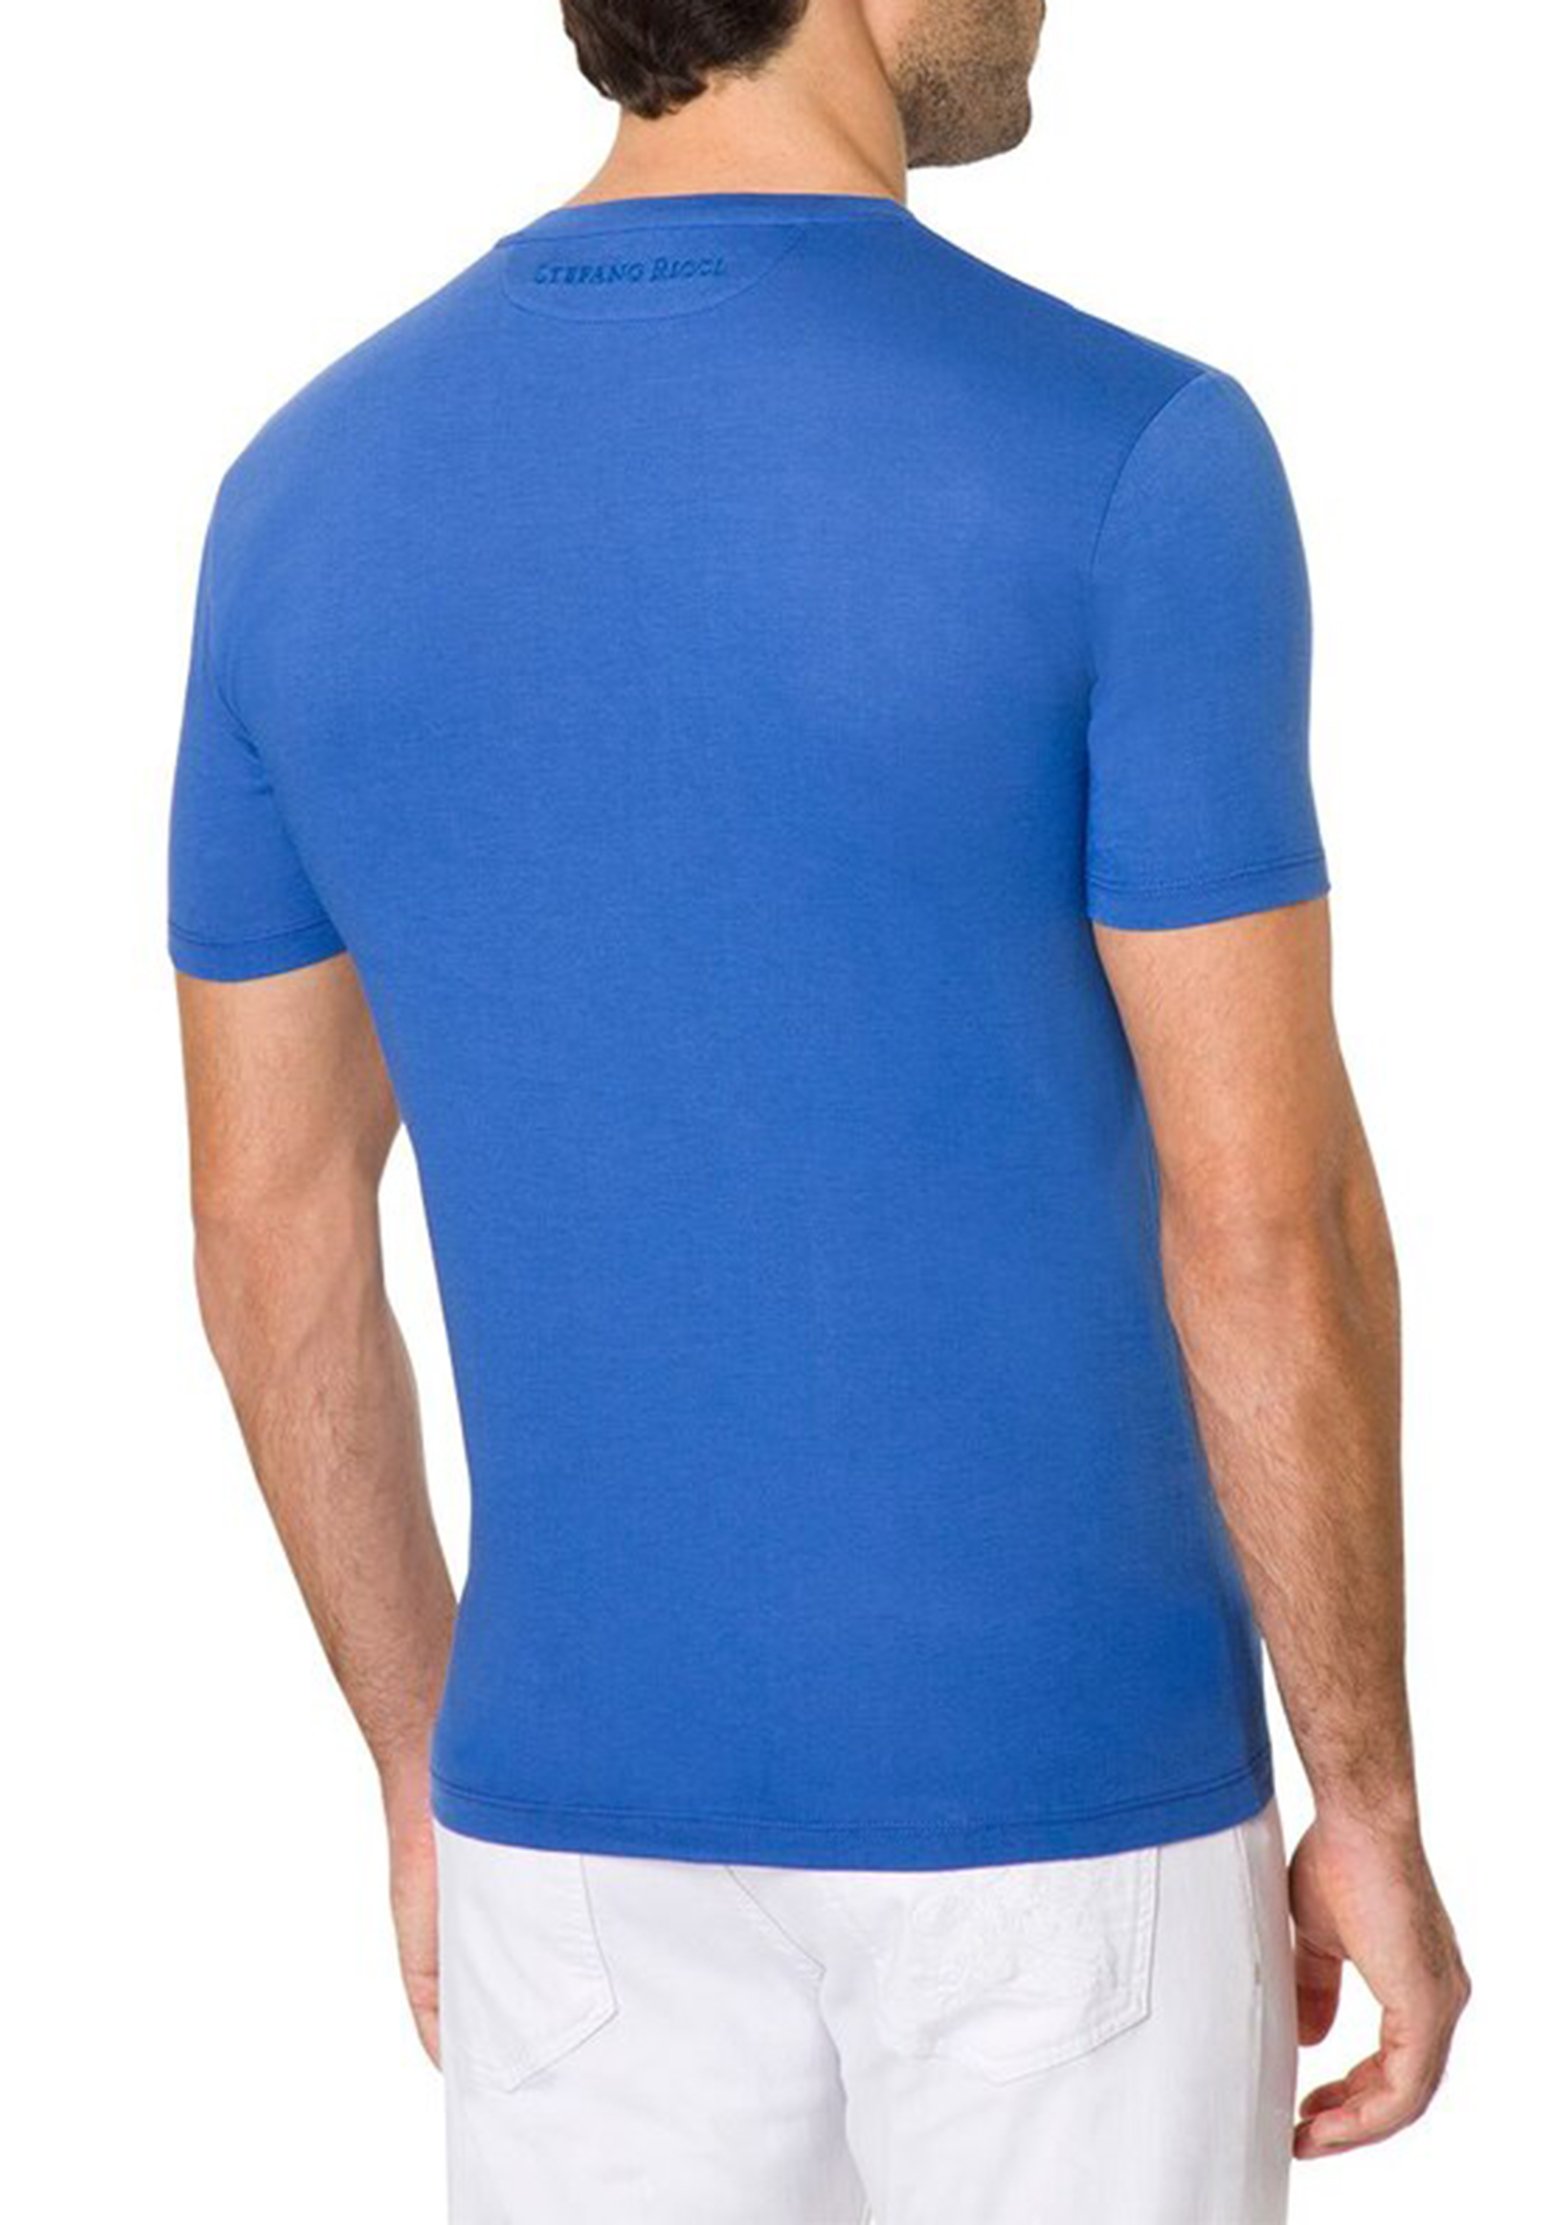 T-Shirt STEFANO RICCI Color: blue (Code: 649) in online store Allure